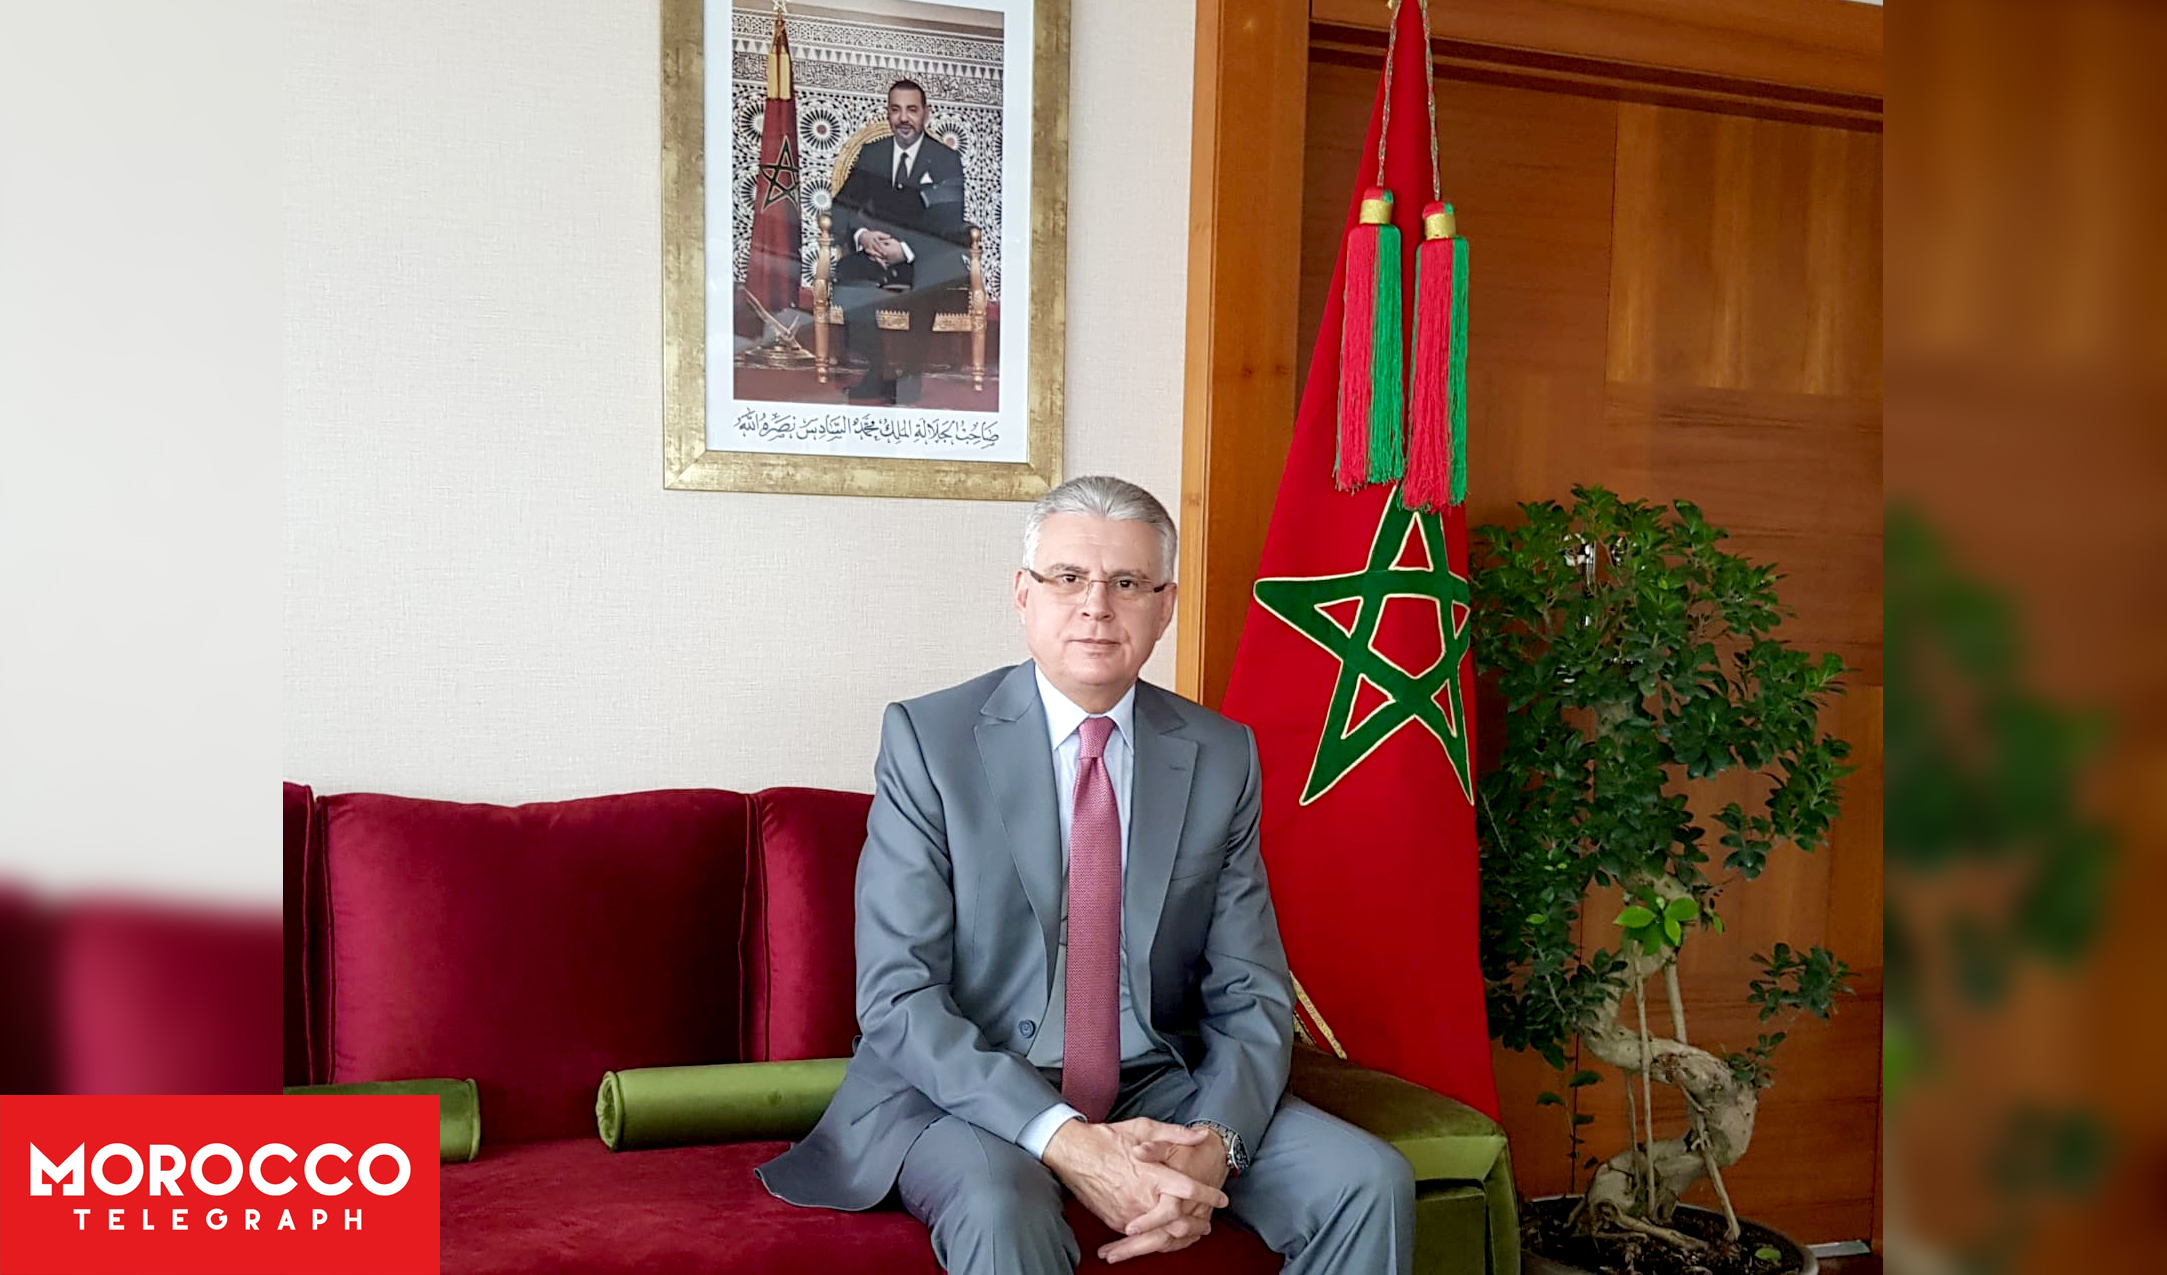 His excellency, Morocco’s Ambassador to Turkey, Mohammed Ali Lazreq